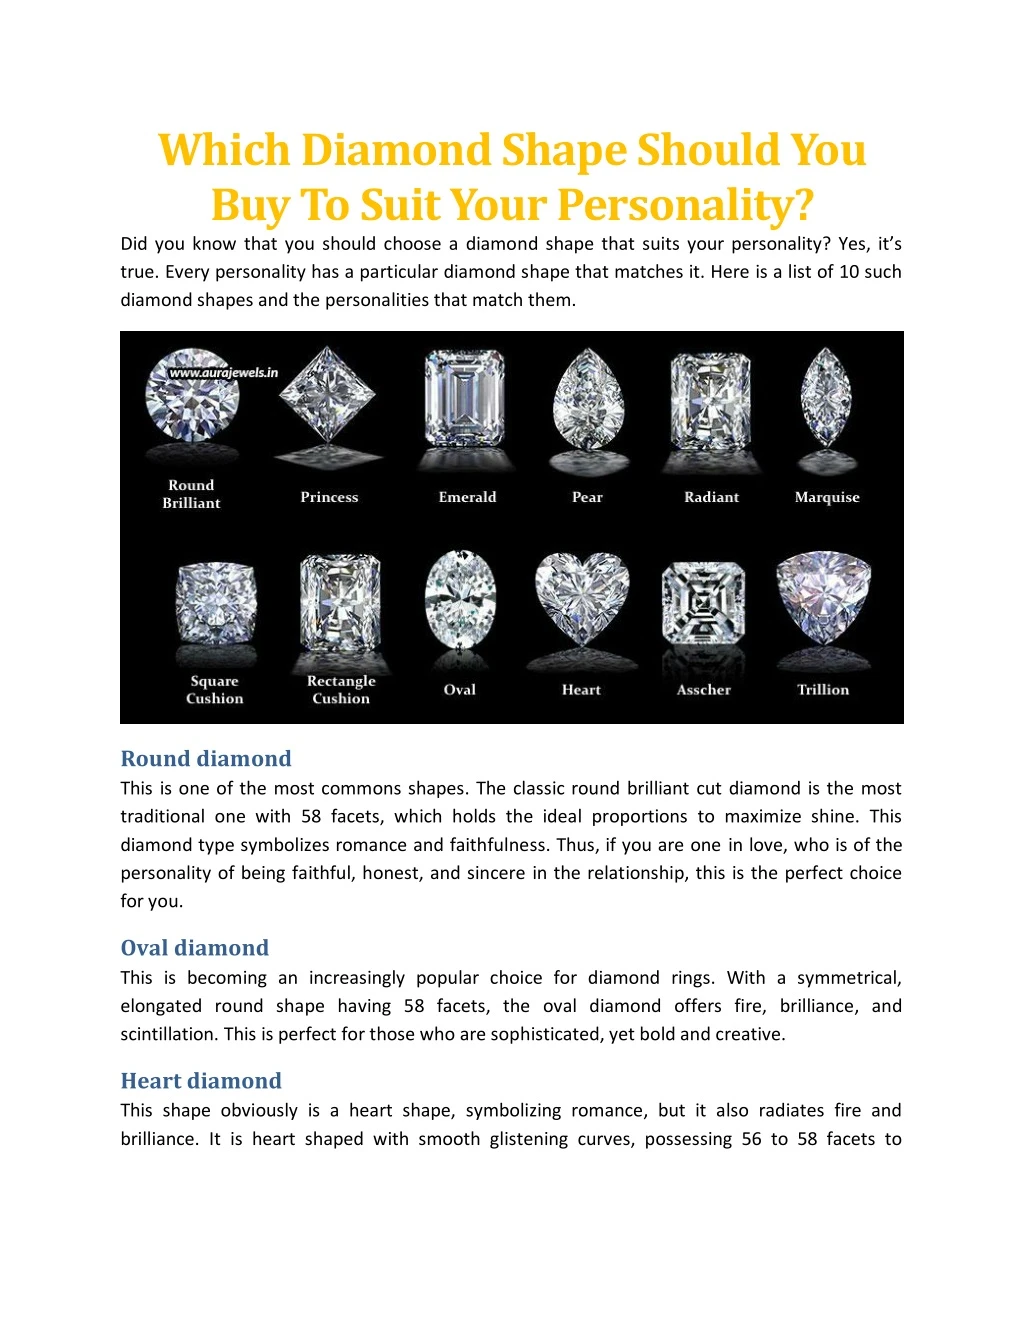 which diamond shape should you buy to suit your